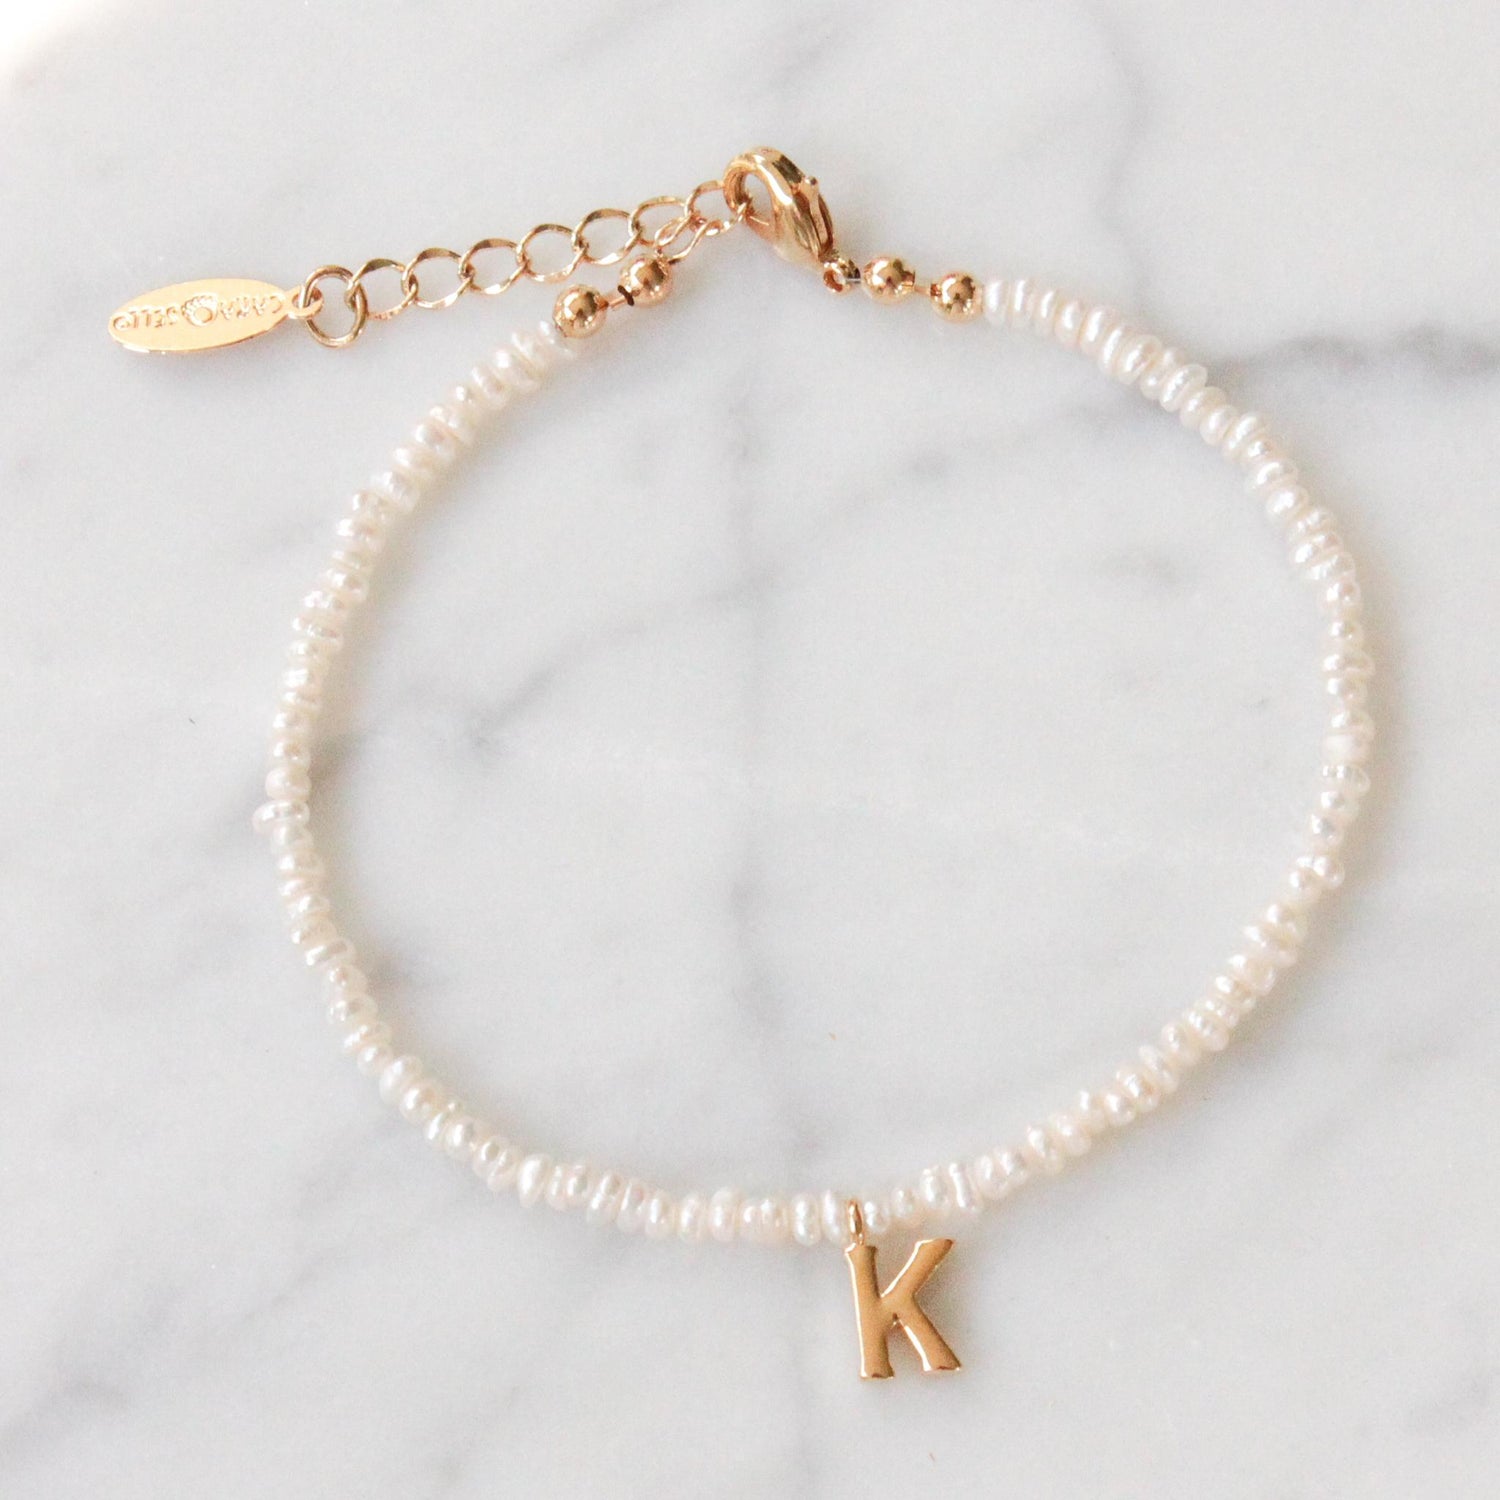 Build Your Own Gold & Rose Charm Bracelet | Handmade Jewelry | Cara O Sello Pearl